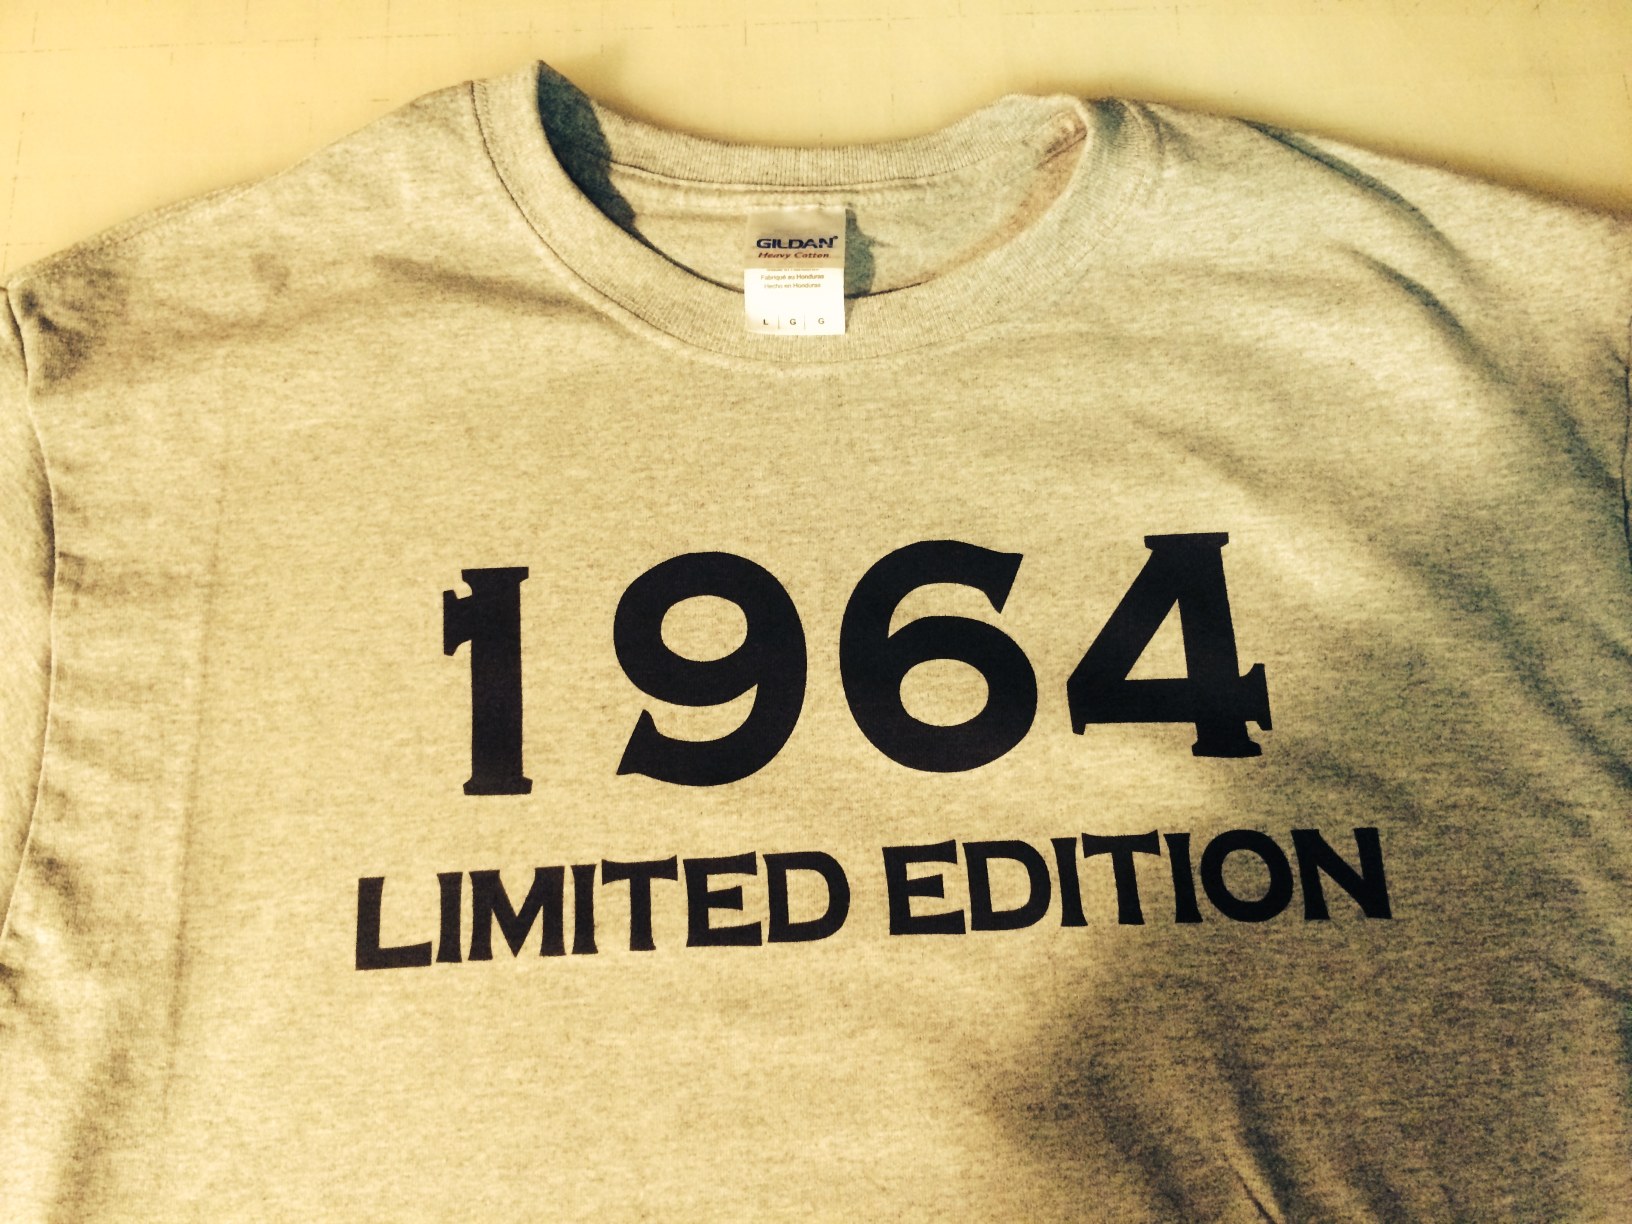 A gray t-shirt with the year 